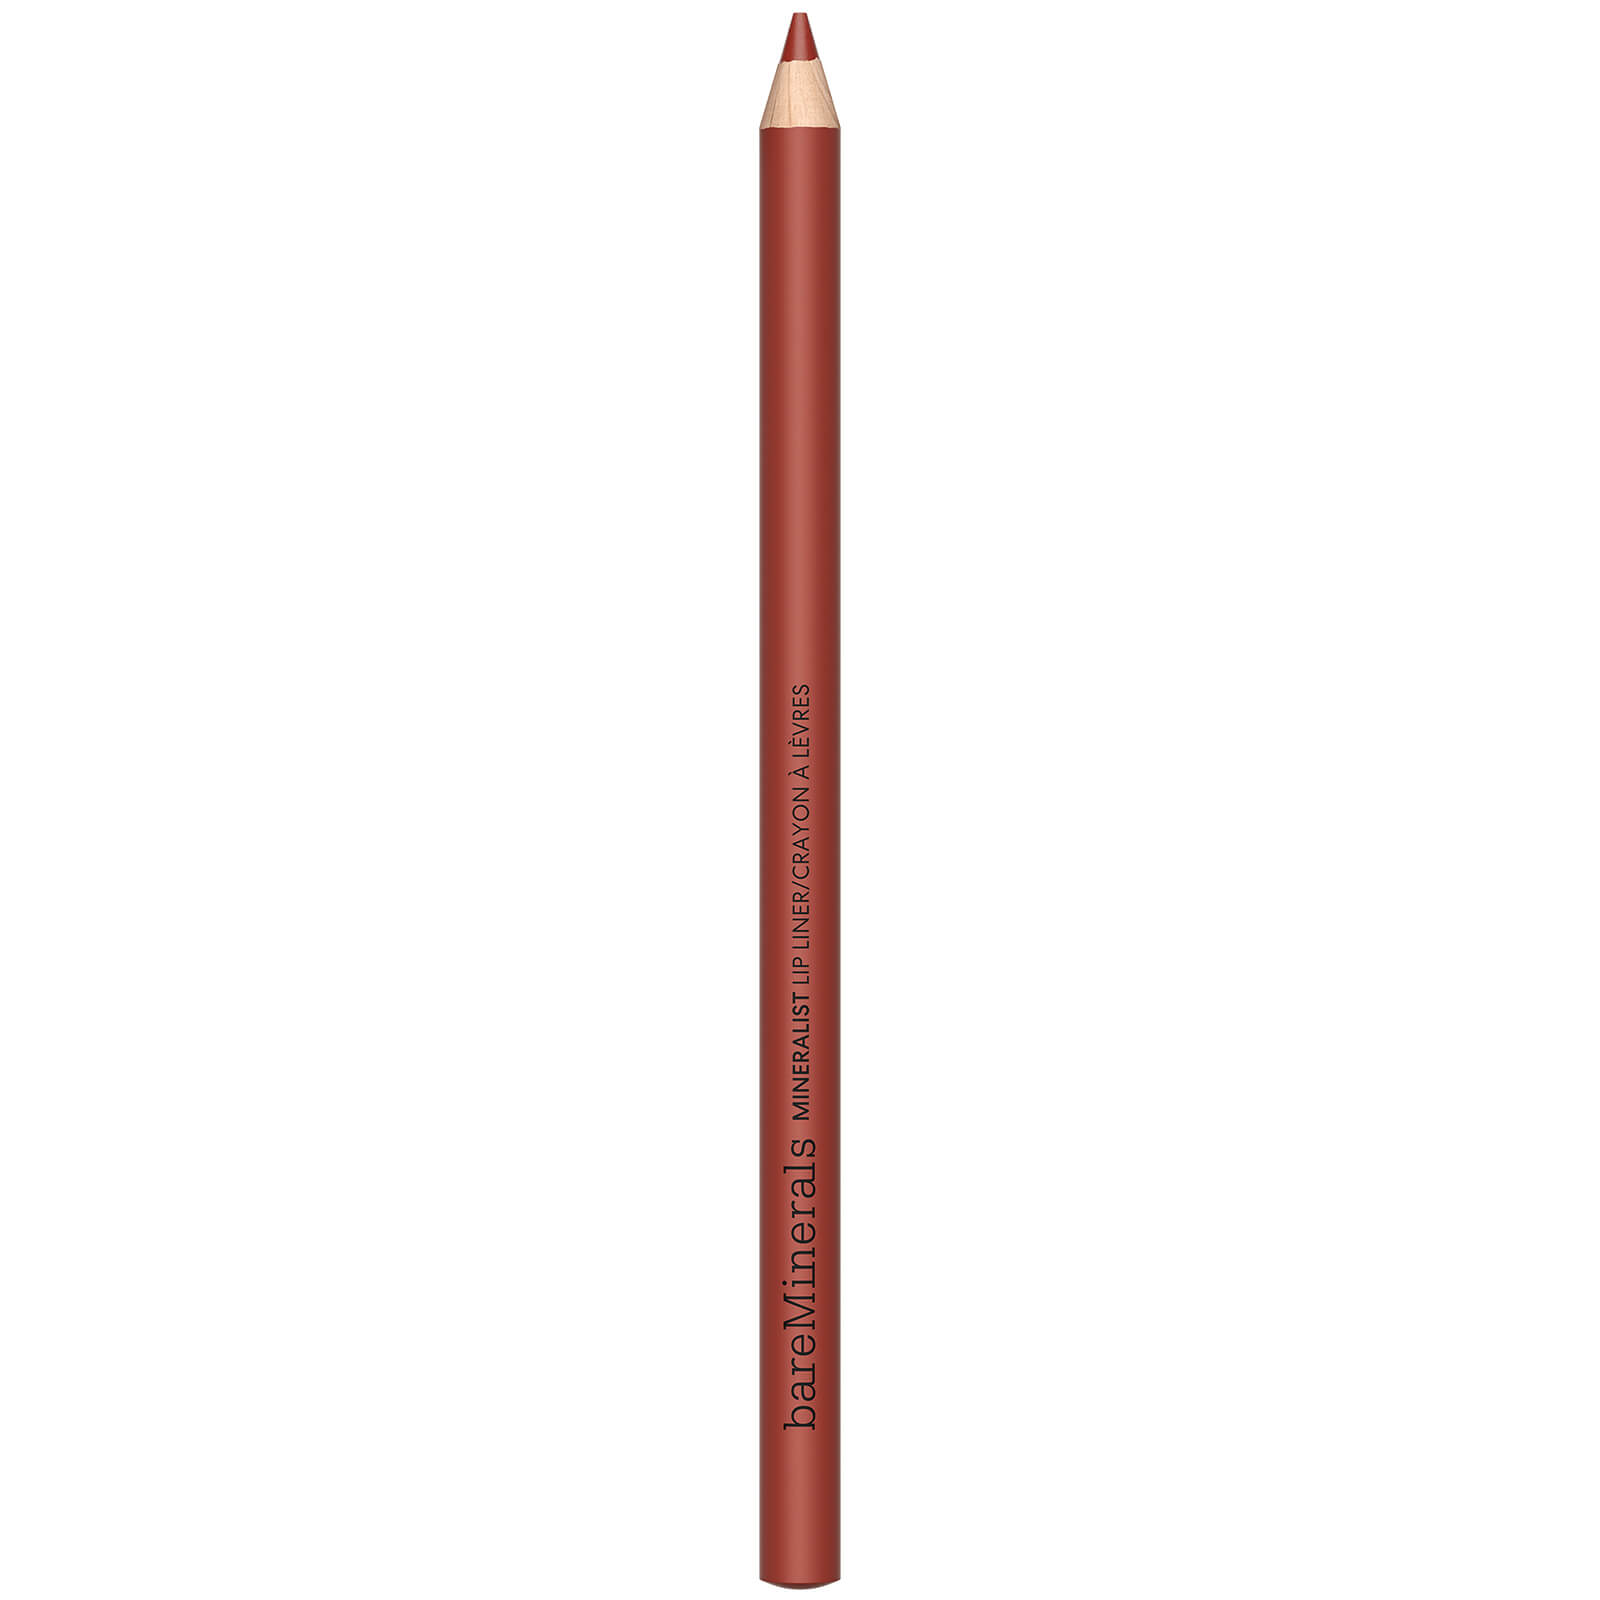 Image of bareMinerals Mineralist Lip Liner 1.5g (Various Shades) - Spice